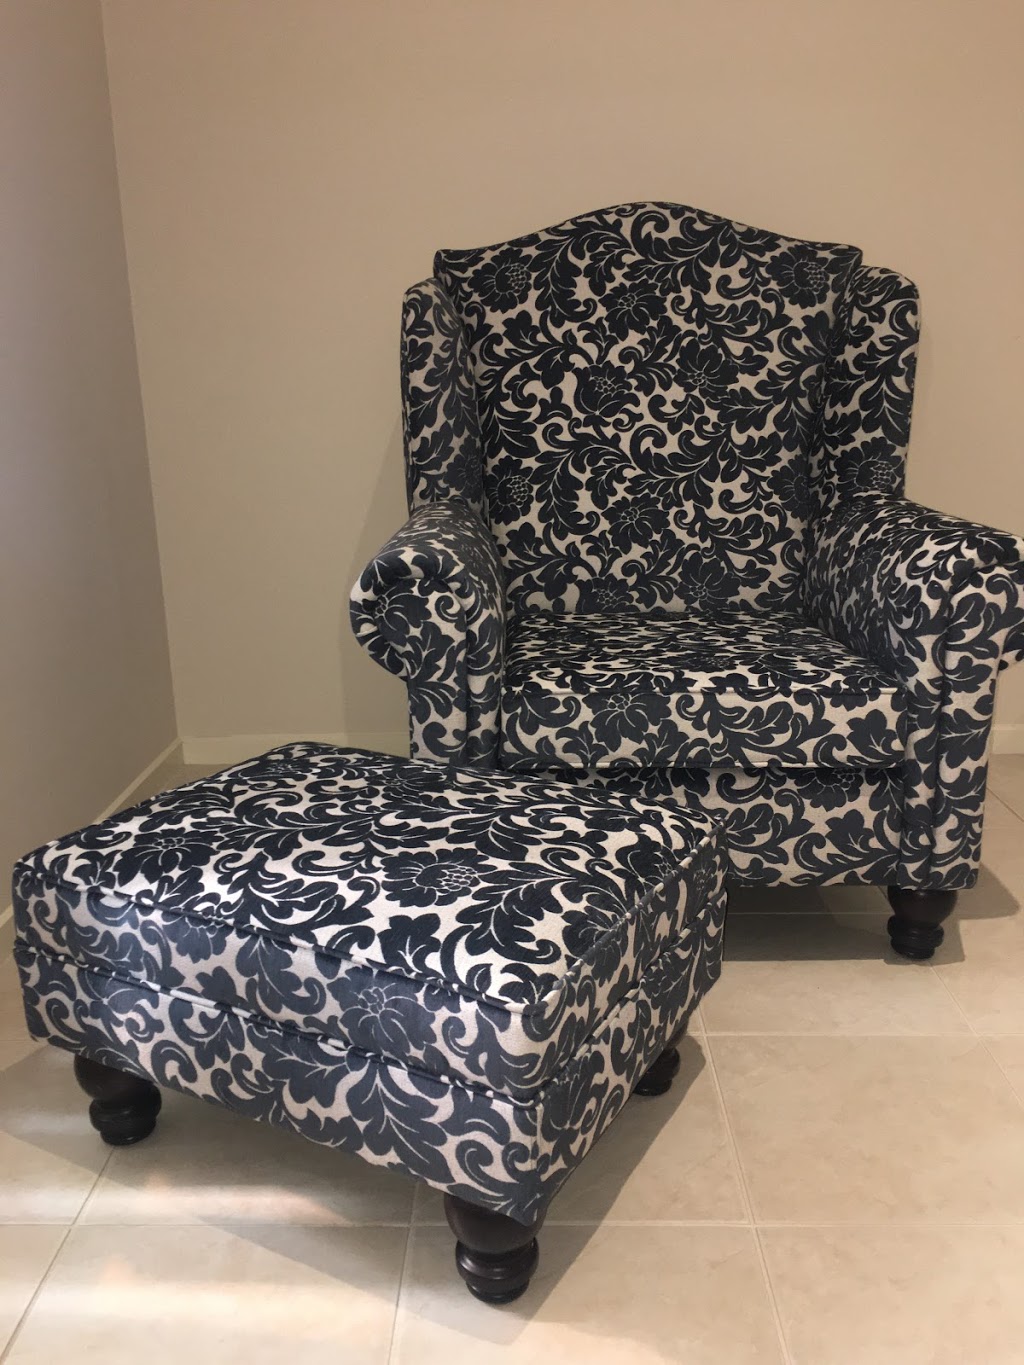 Paris upholstery |  | 776 Armstrong Rd, Manor Lakes VIC 3024, Australia | 0415916007 OR +61 415 916 007